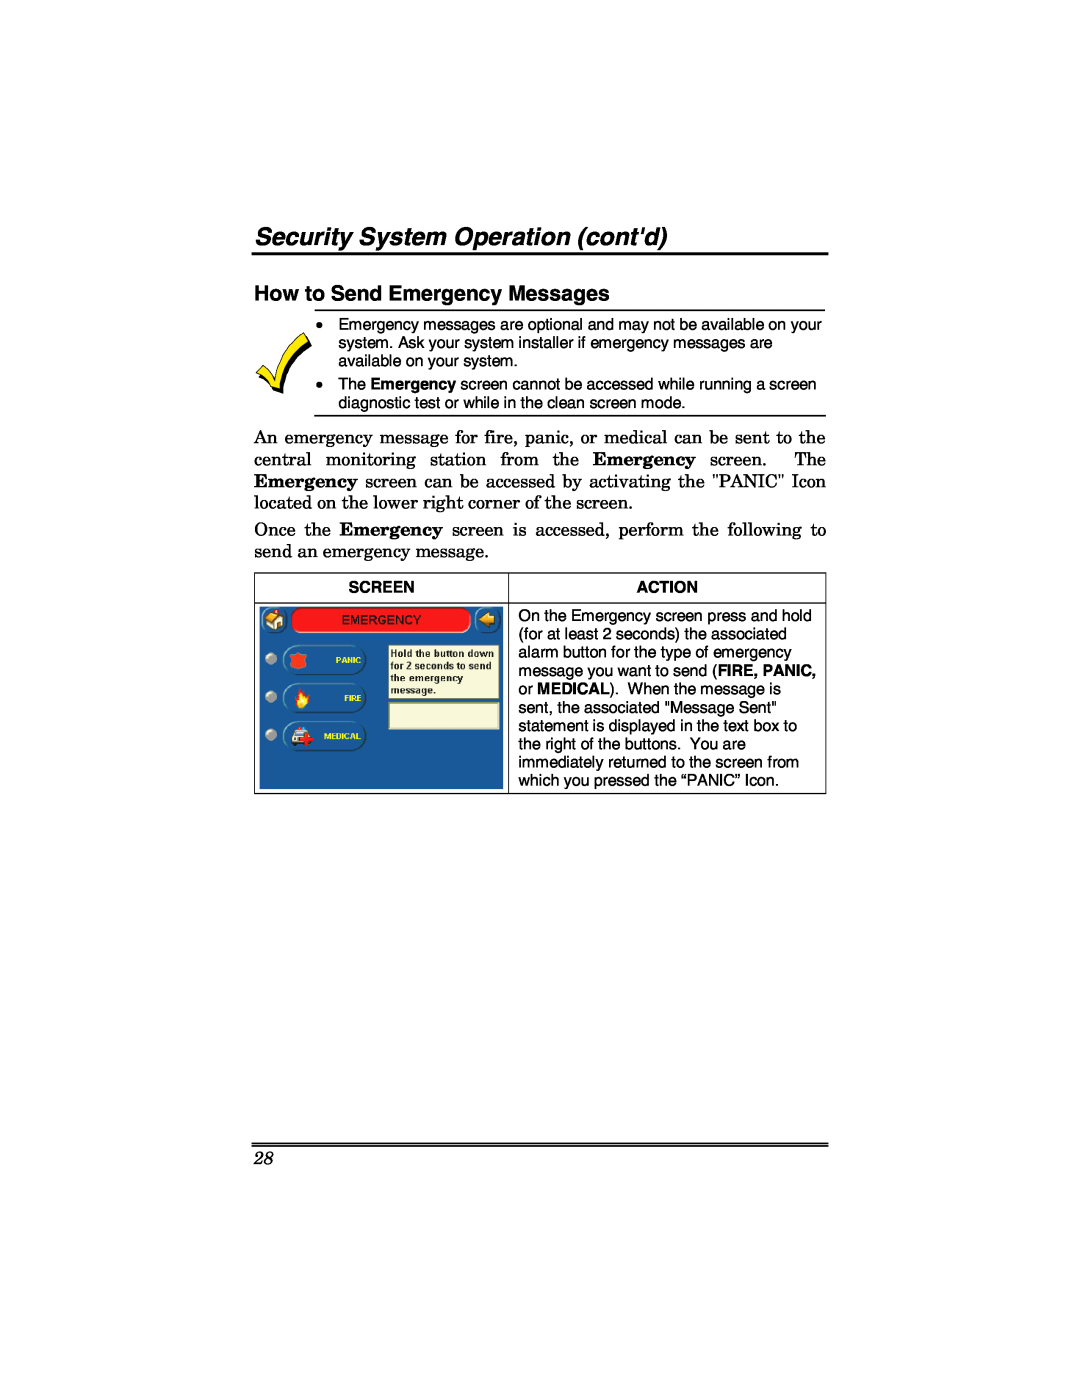 Honeywell 6271 manual How to Send Emergency Messages, Security System Operation contd 